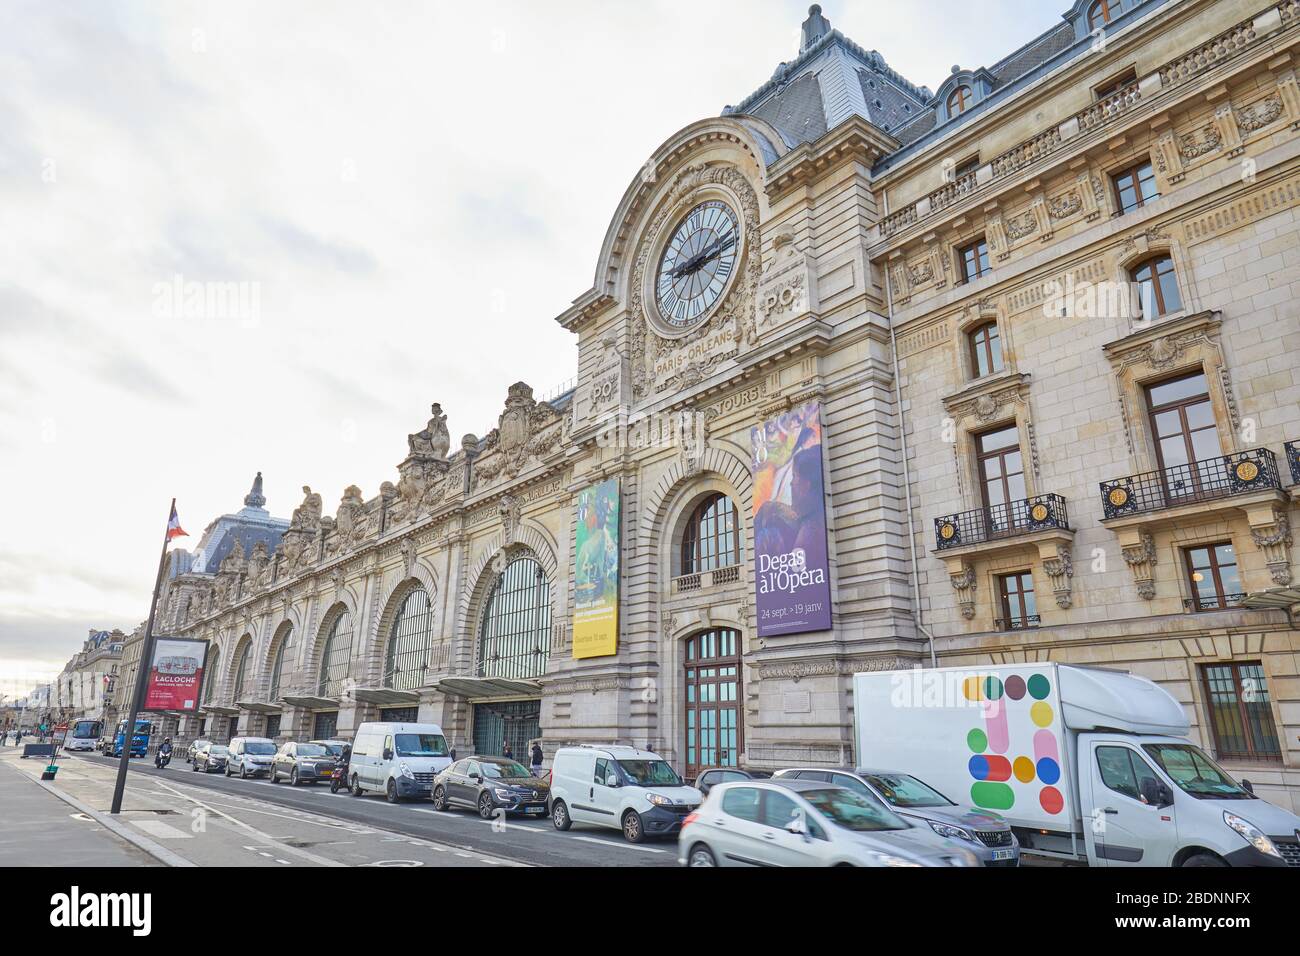 PARIS, FRANCE - NOVEMBER 8, 2019: Gare D'Orsay or Orsay museum building with traffic in a cloudy day in Paris Stock Photo